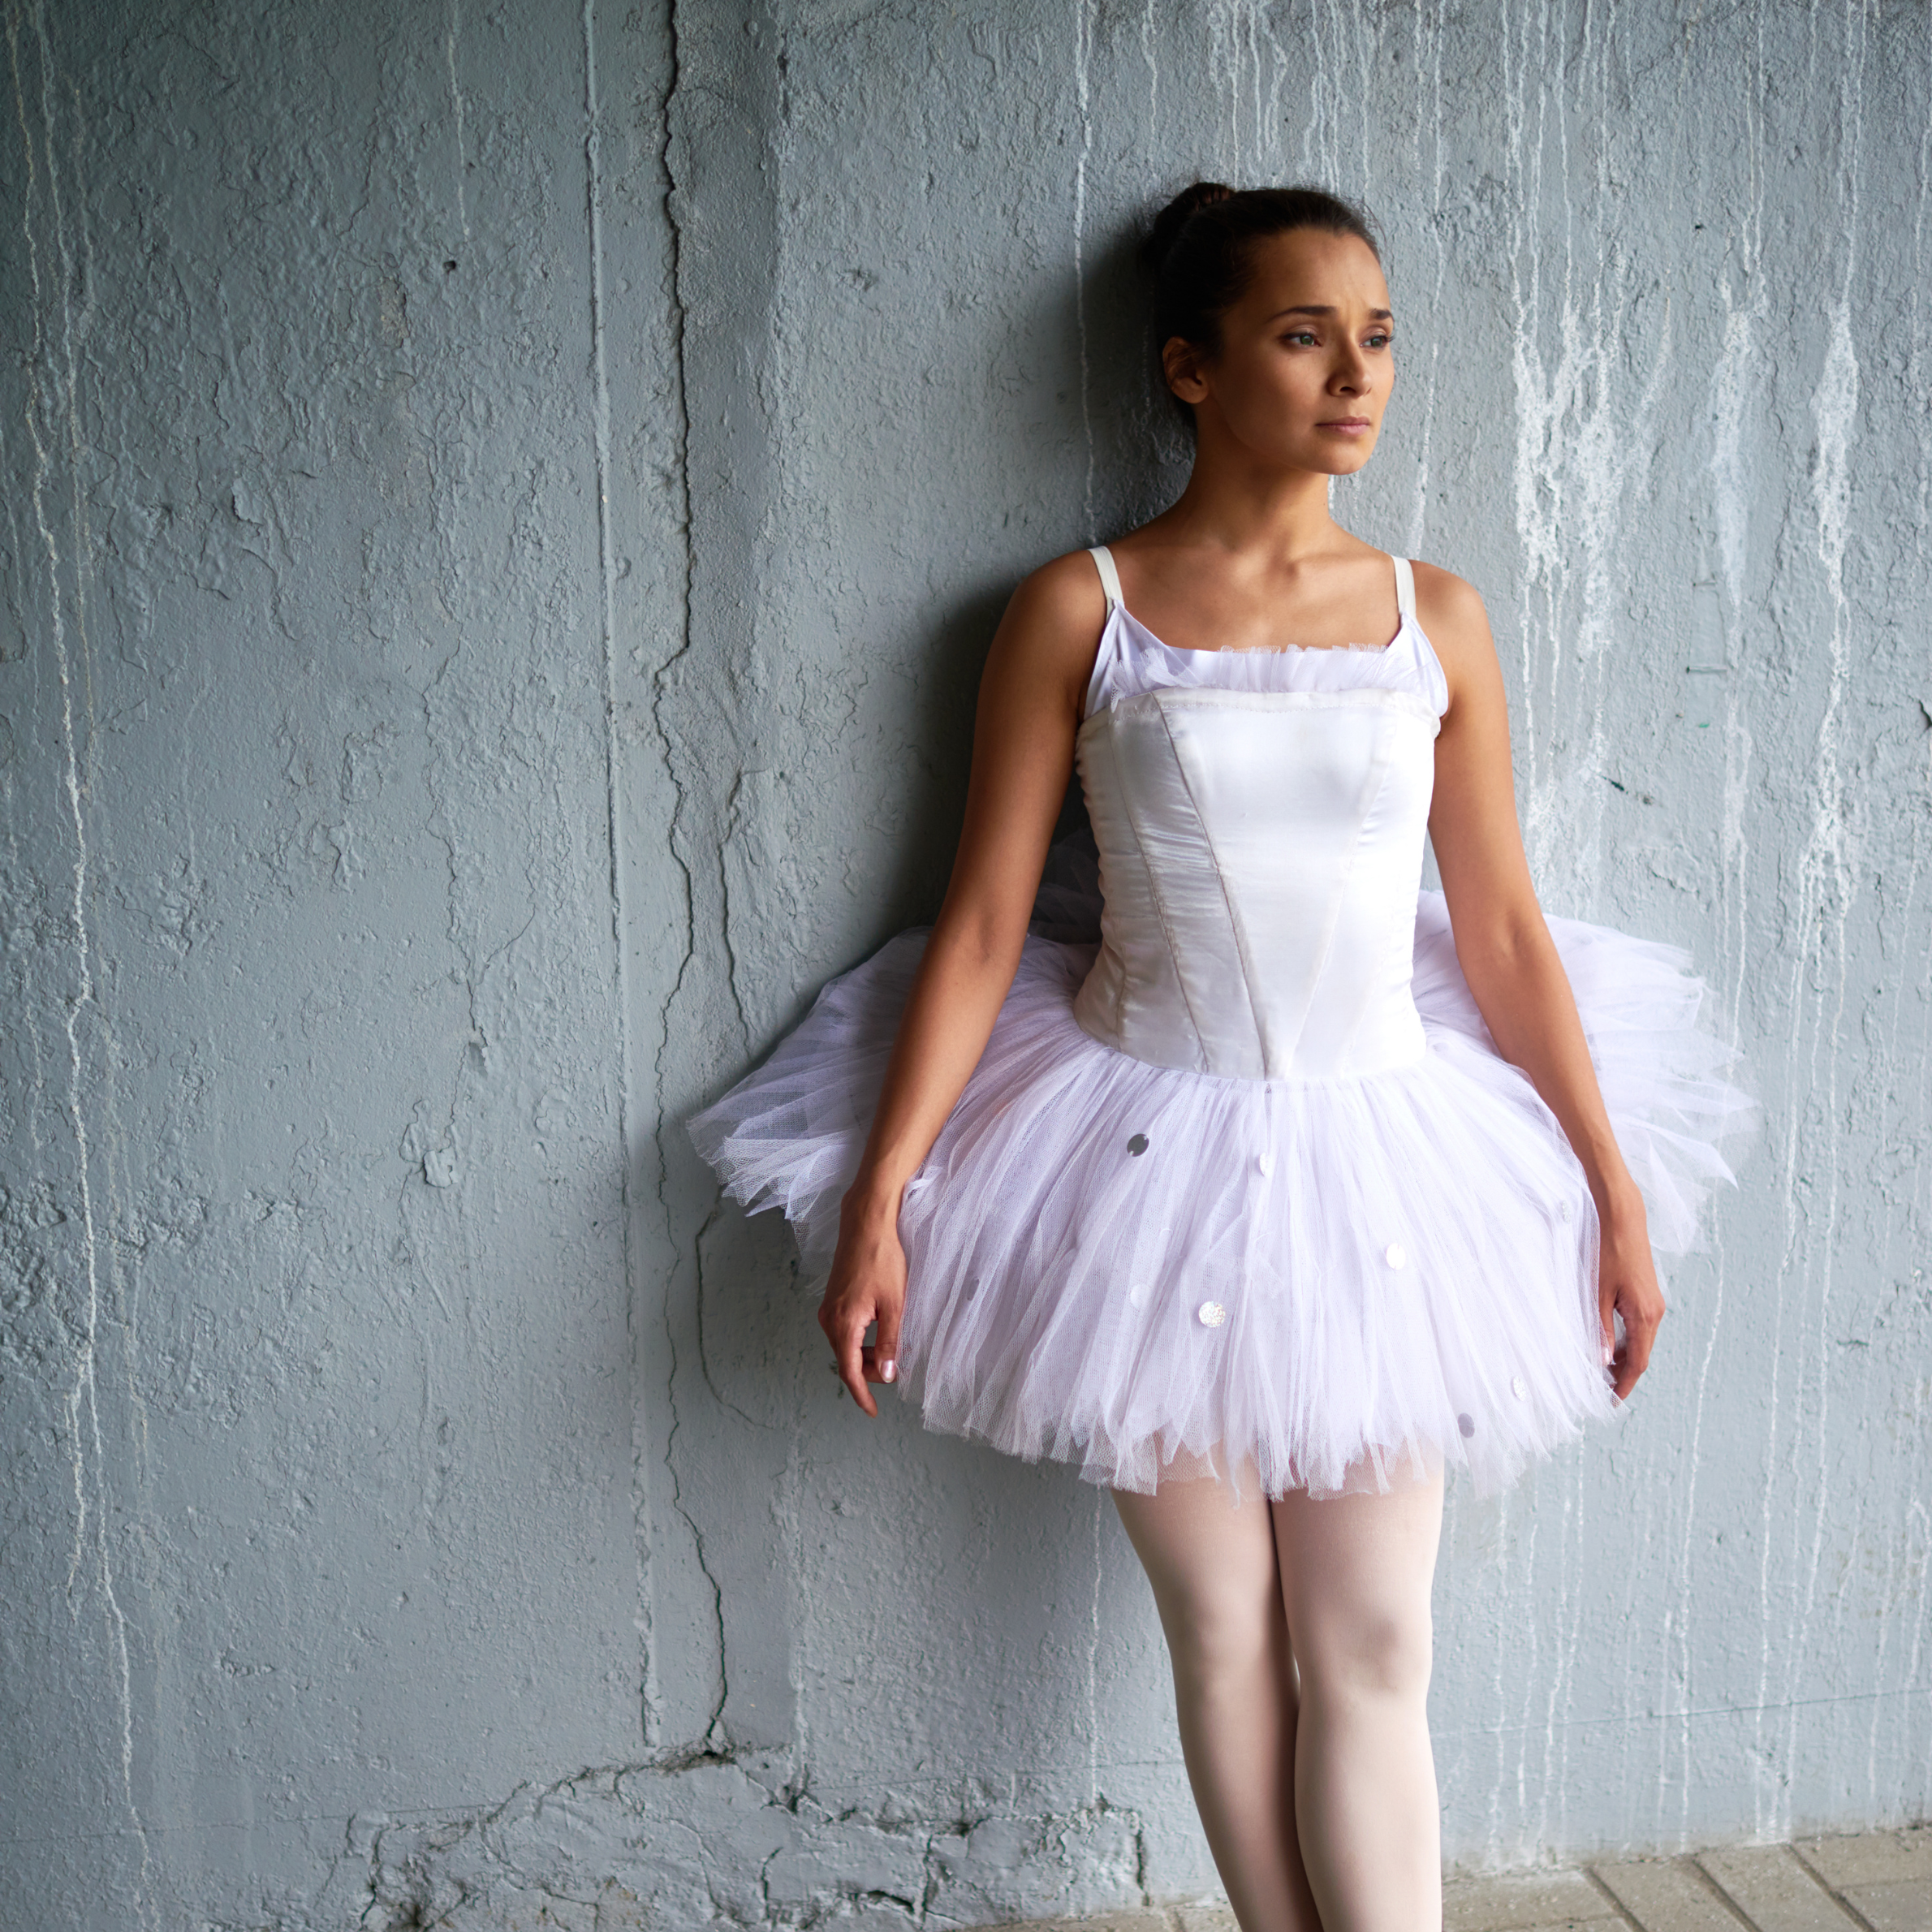 Burnout in Ballet: Why Less is More